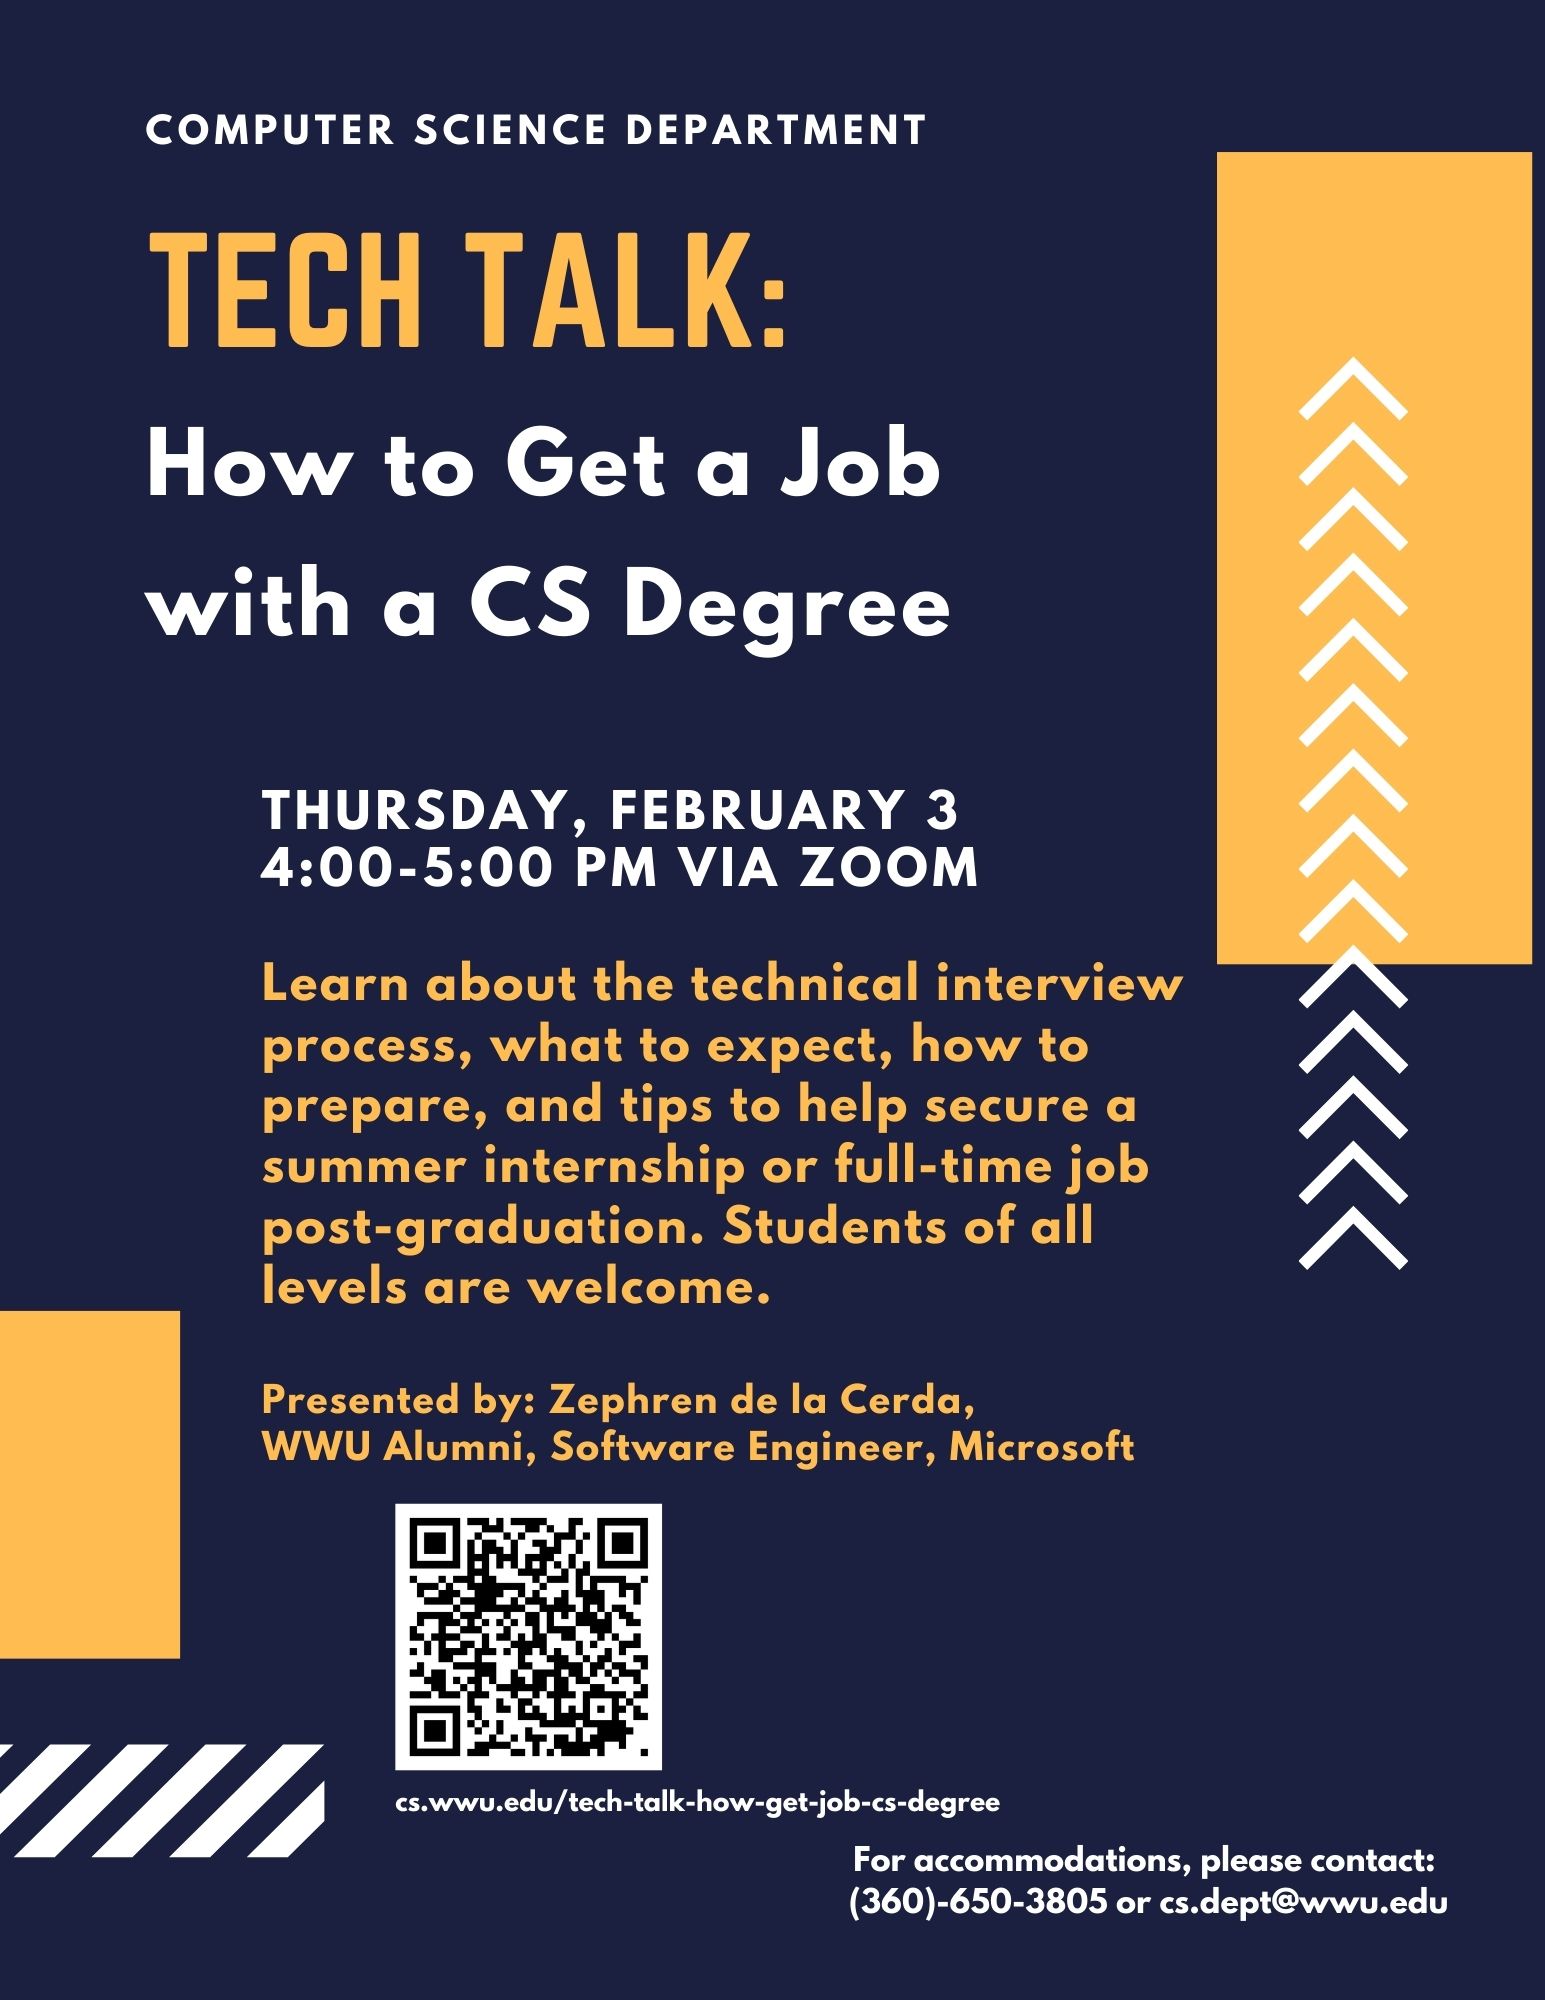 Poster for Tech Talk Event